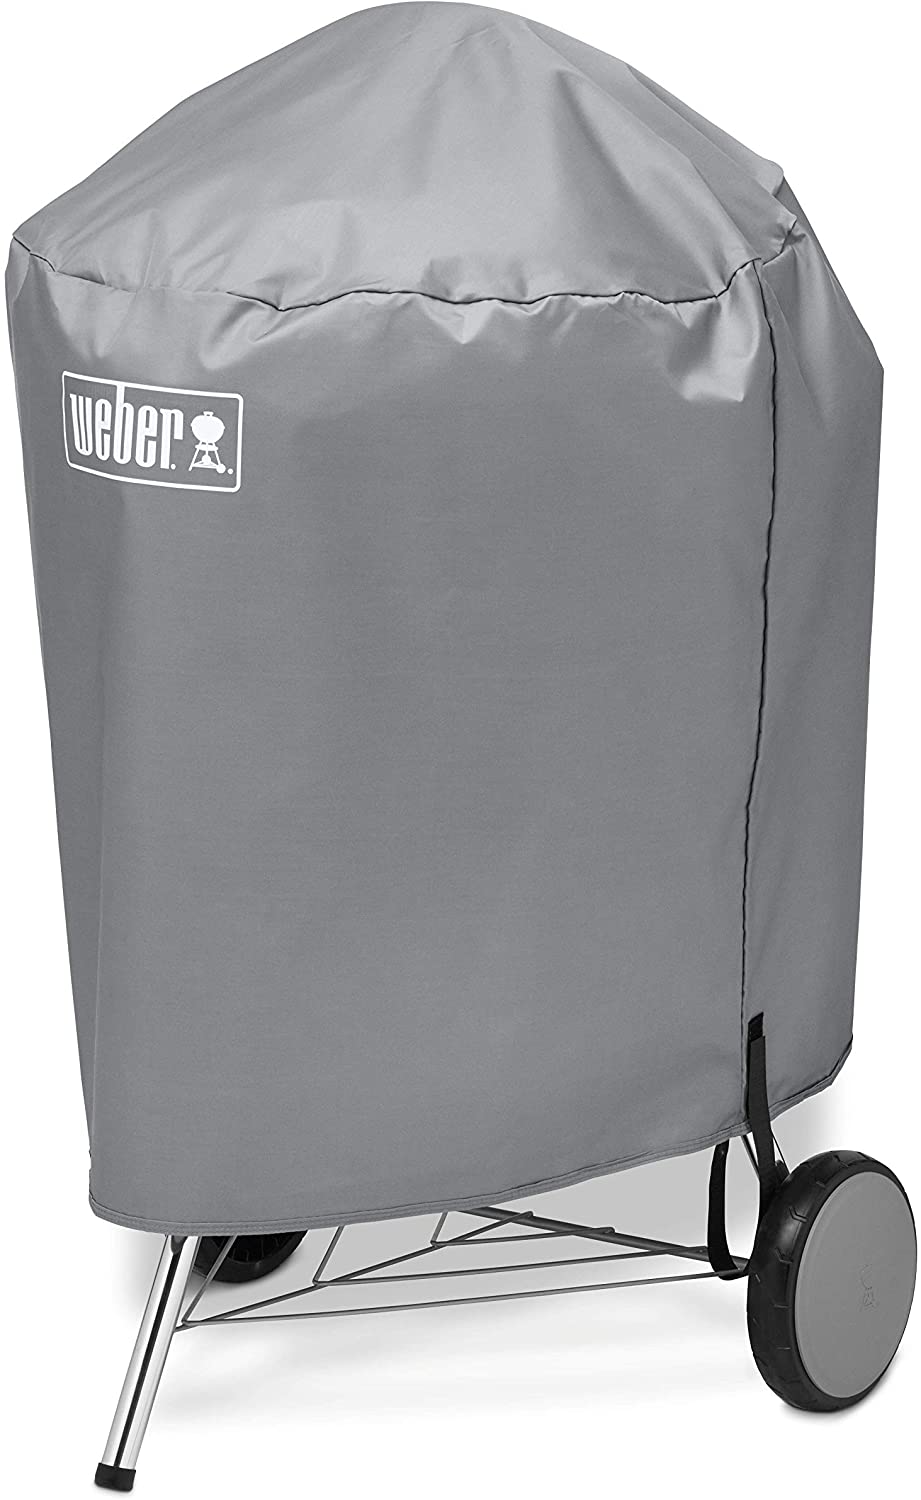 Weber 7176 Grey Charcoal Barbecue Cover 57 cm Diameter